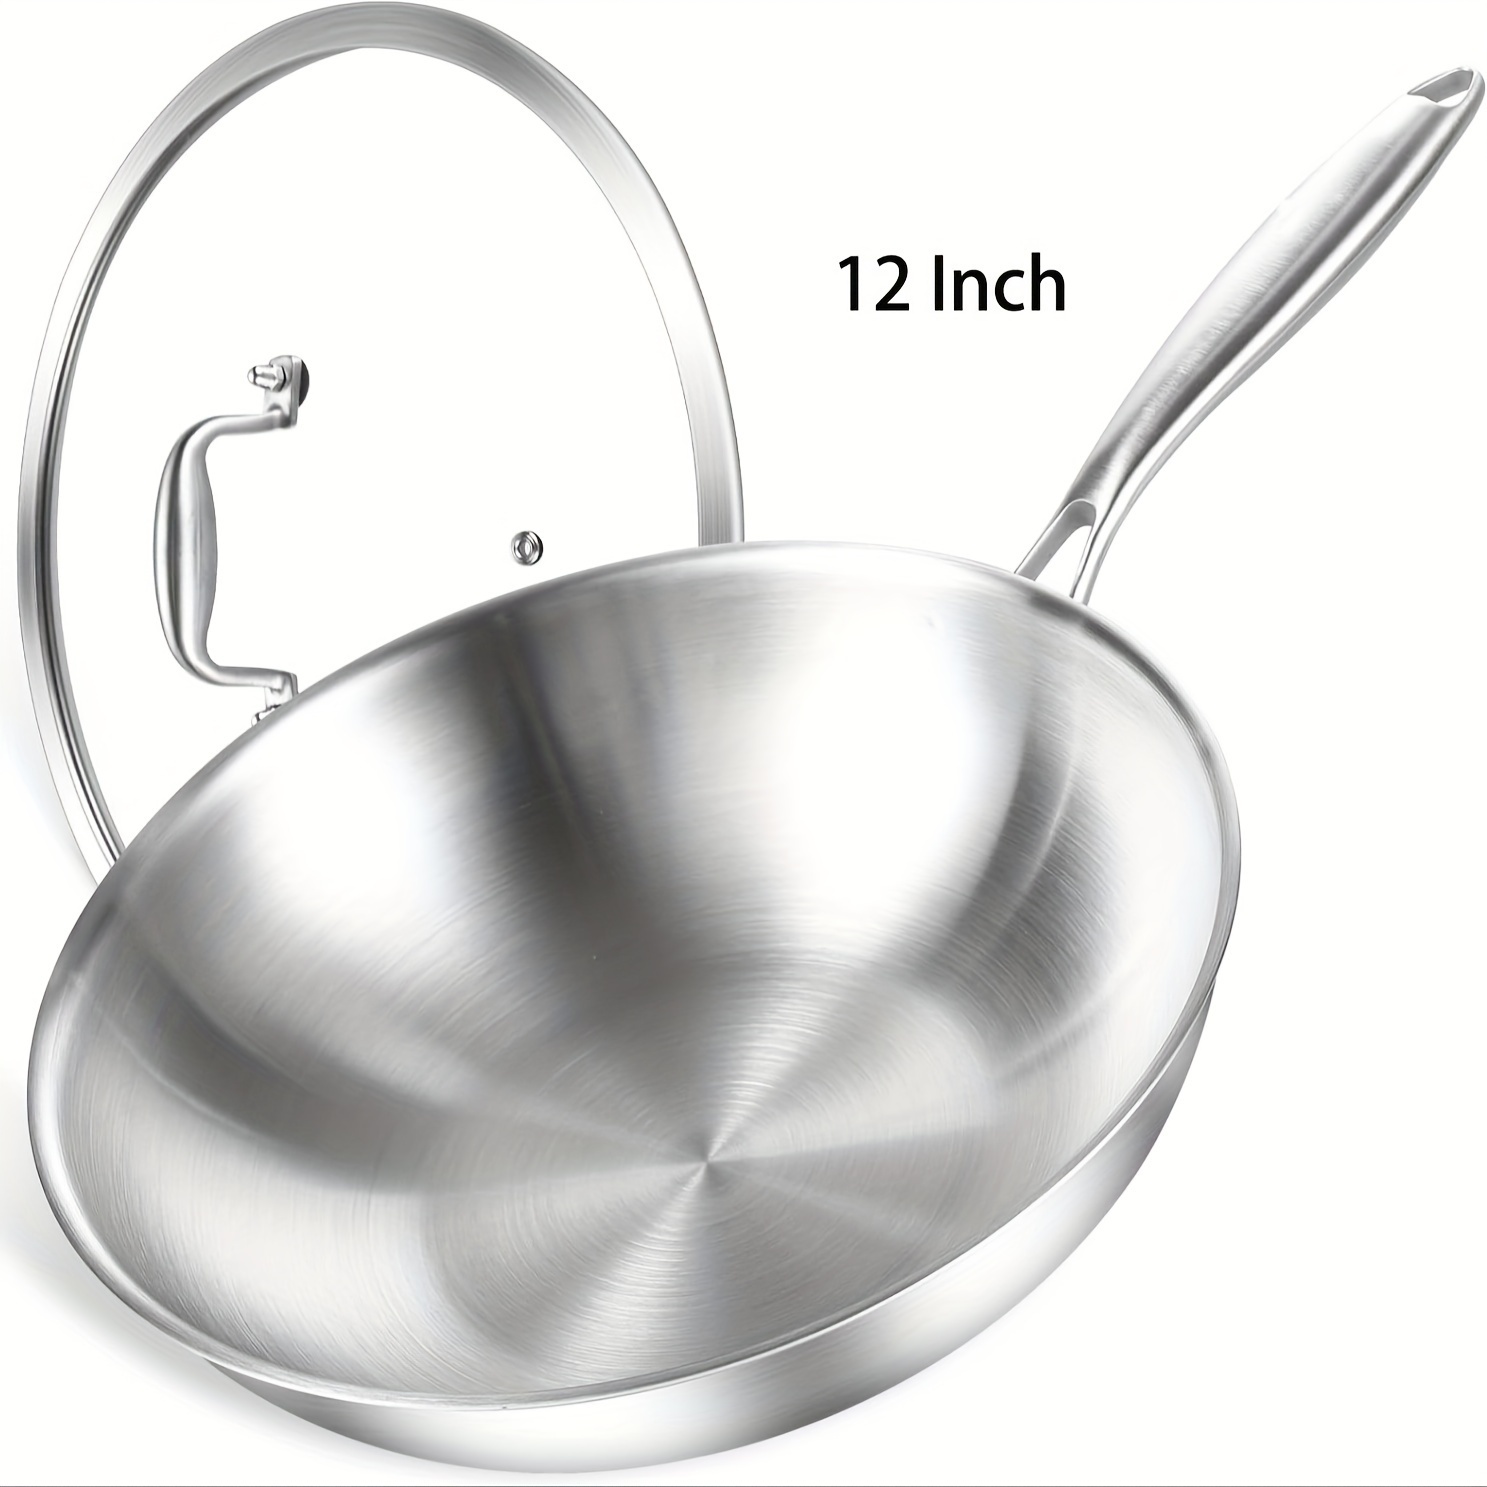 1pc stainless steel wok stainless steel 3 layer frying pan with glass cover pfoa free for home kitchen restaurant hotel kitchen supplies cookware